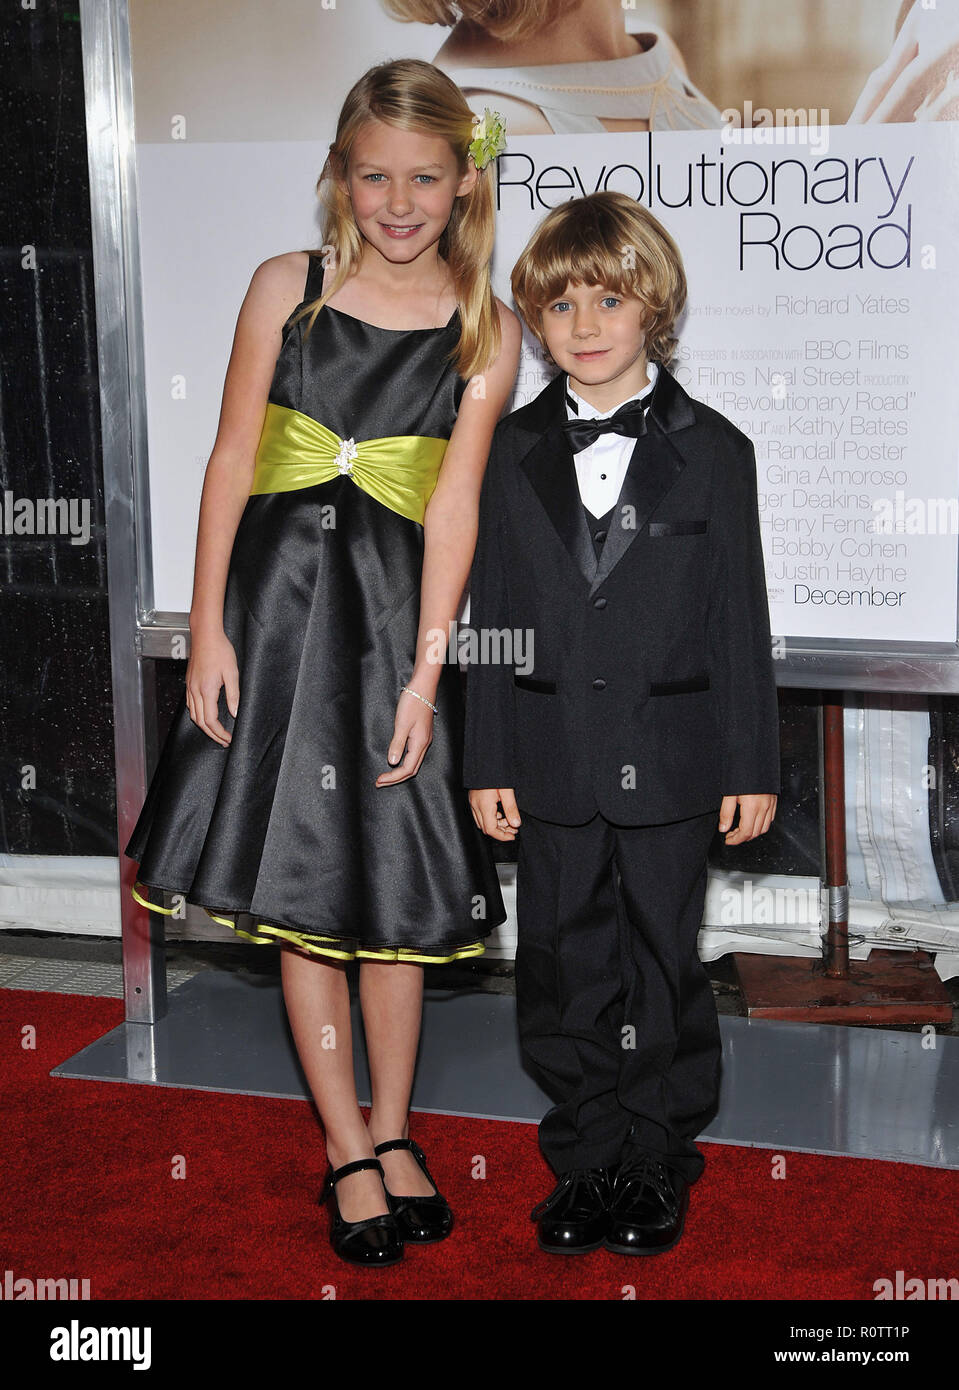 Ryan and Ty Simpkins - Revolutionary Road Premiere at the Westwood ...